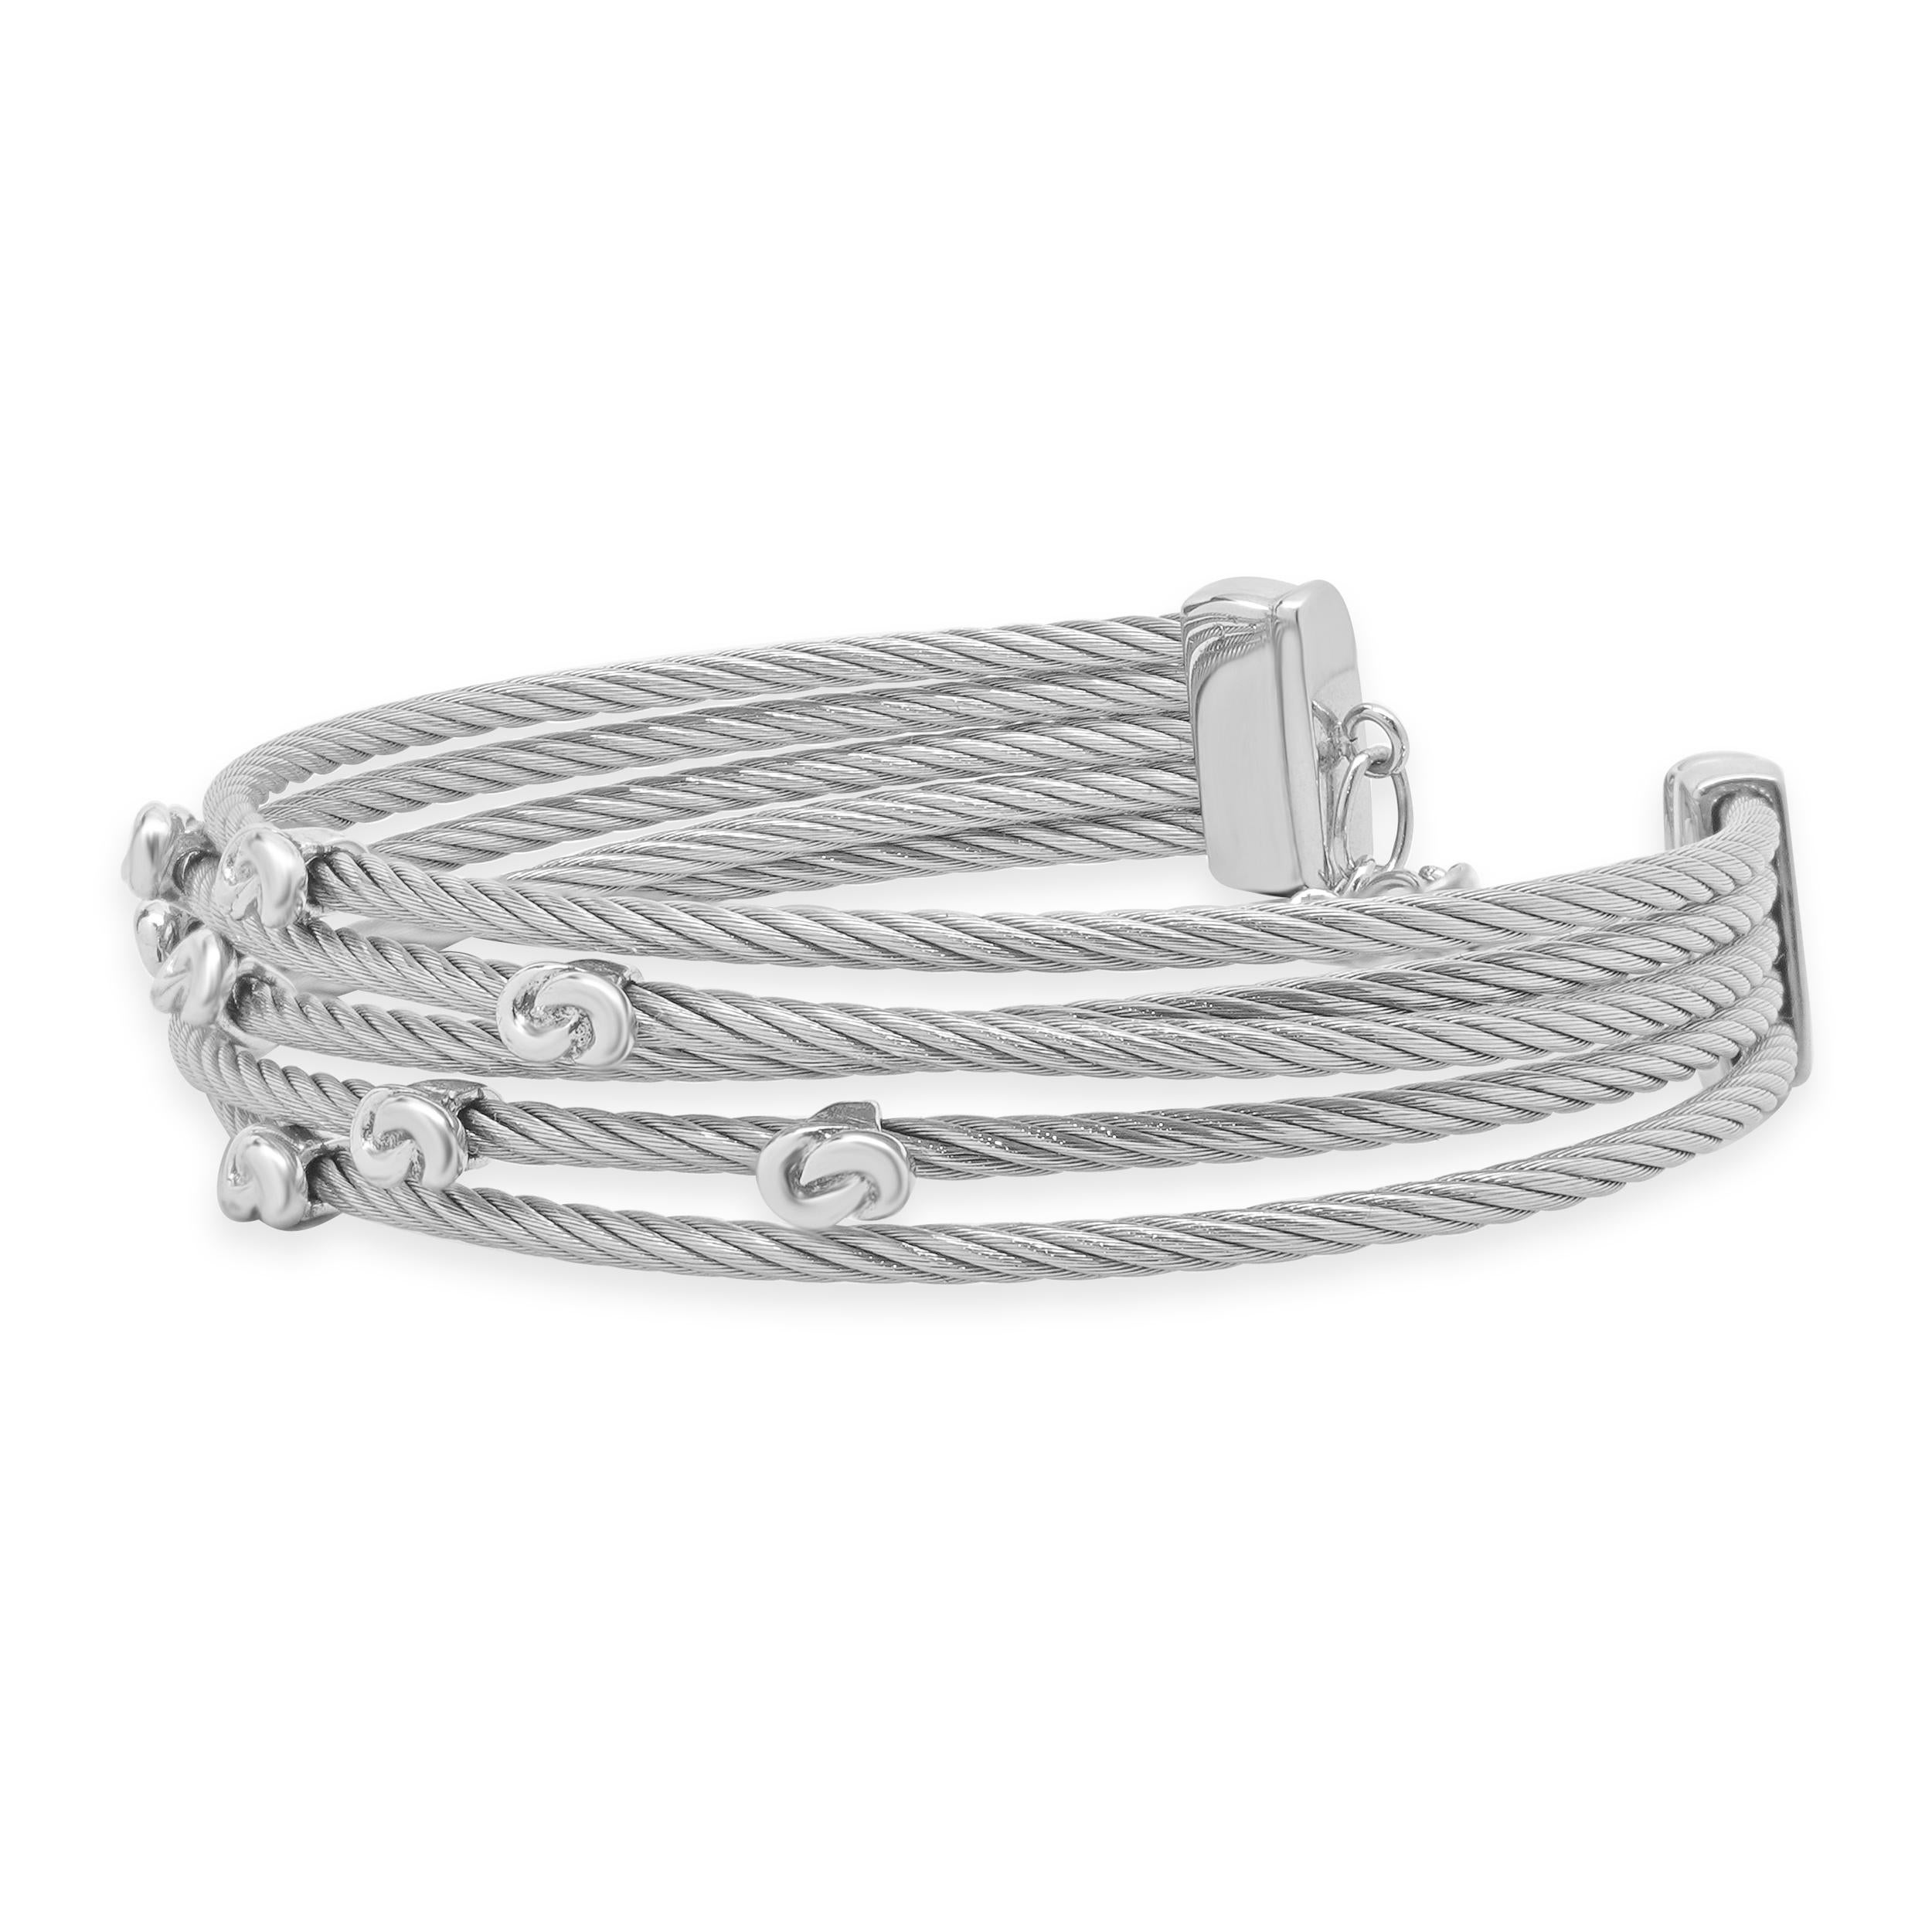 Designer: Charriol
Material: stainless steel
Dimensions: bracelet measures 6.5-inches
Weight: 18.64 grams
